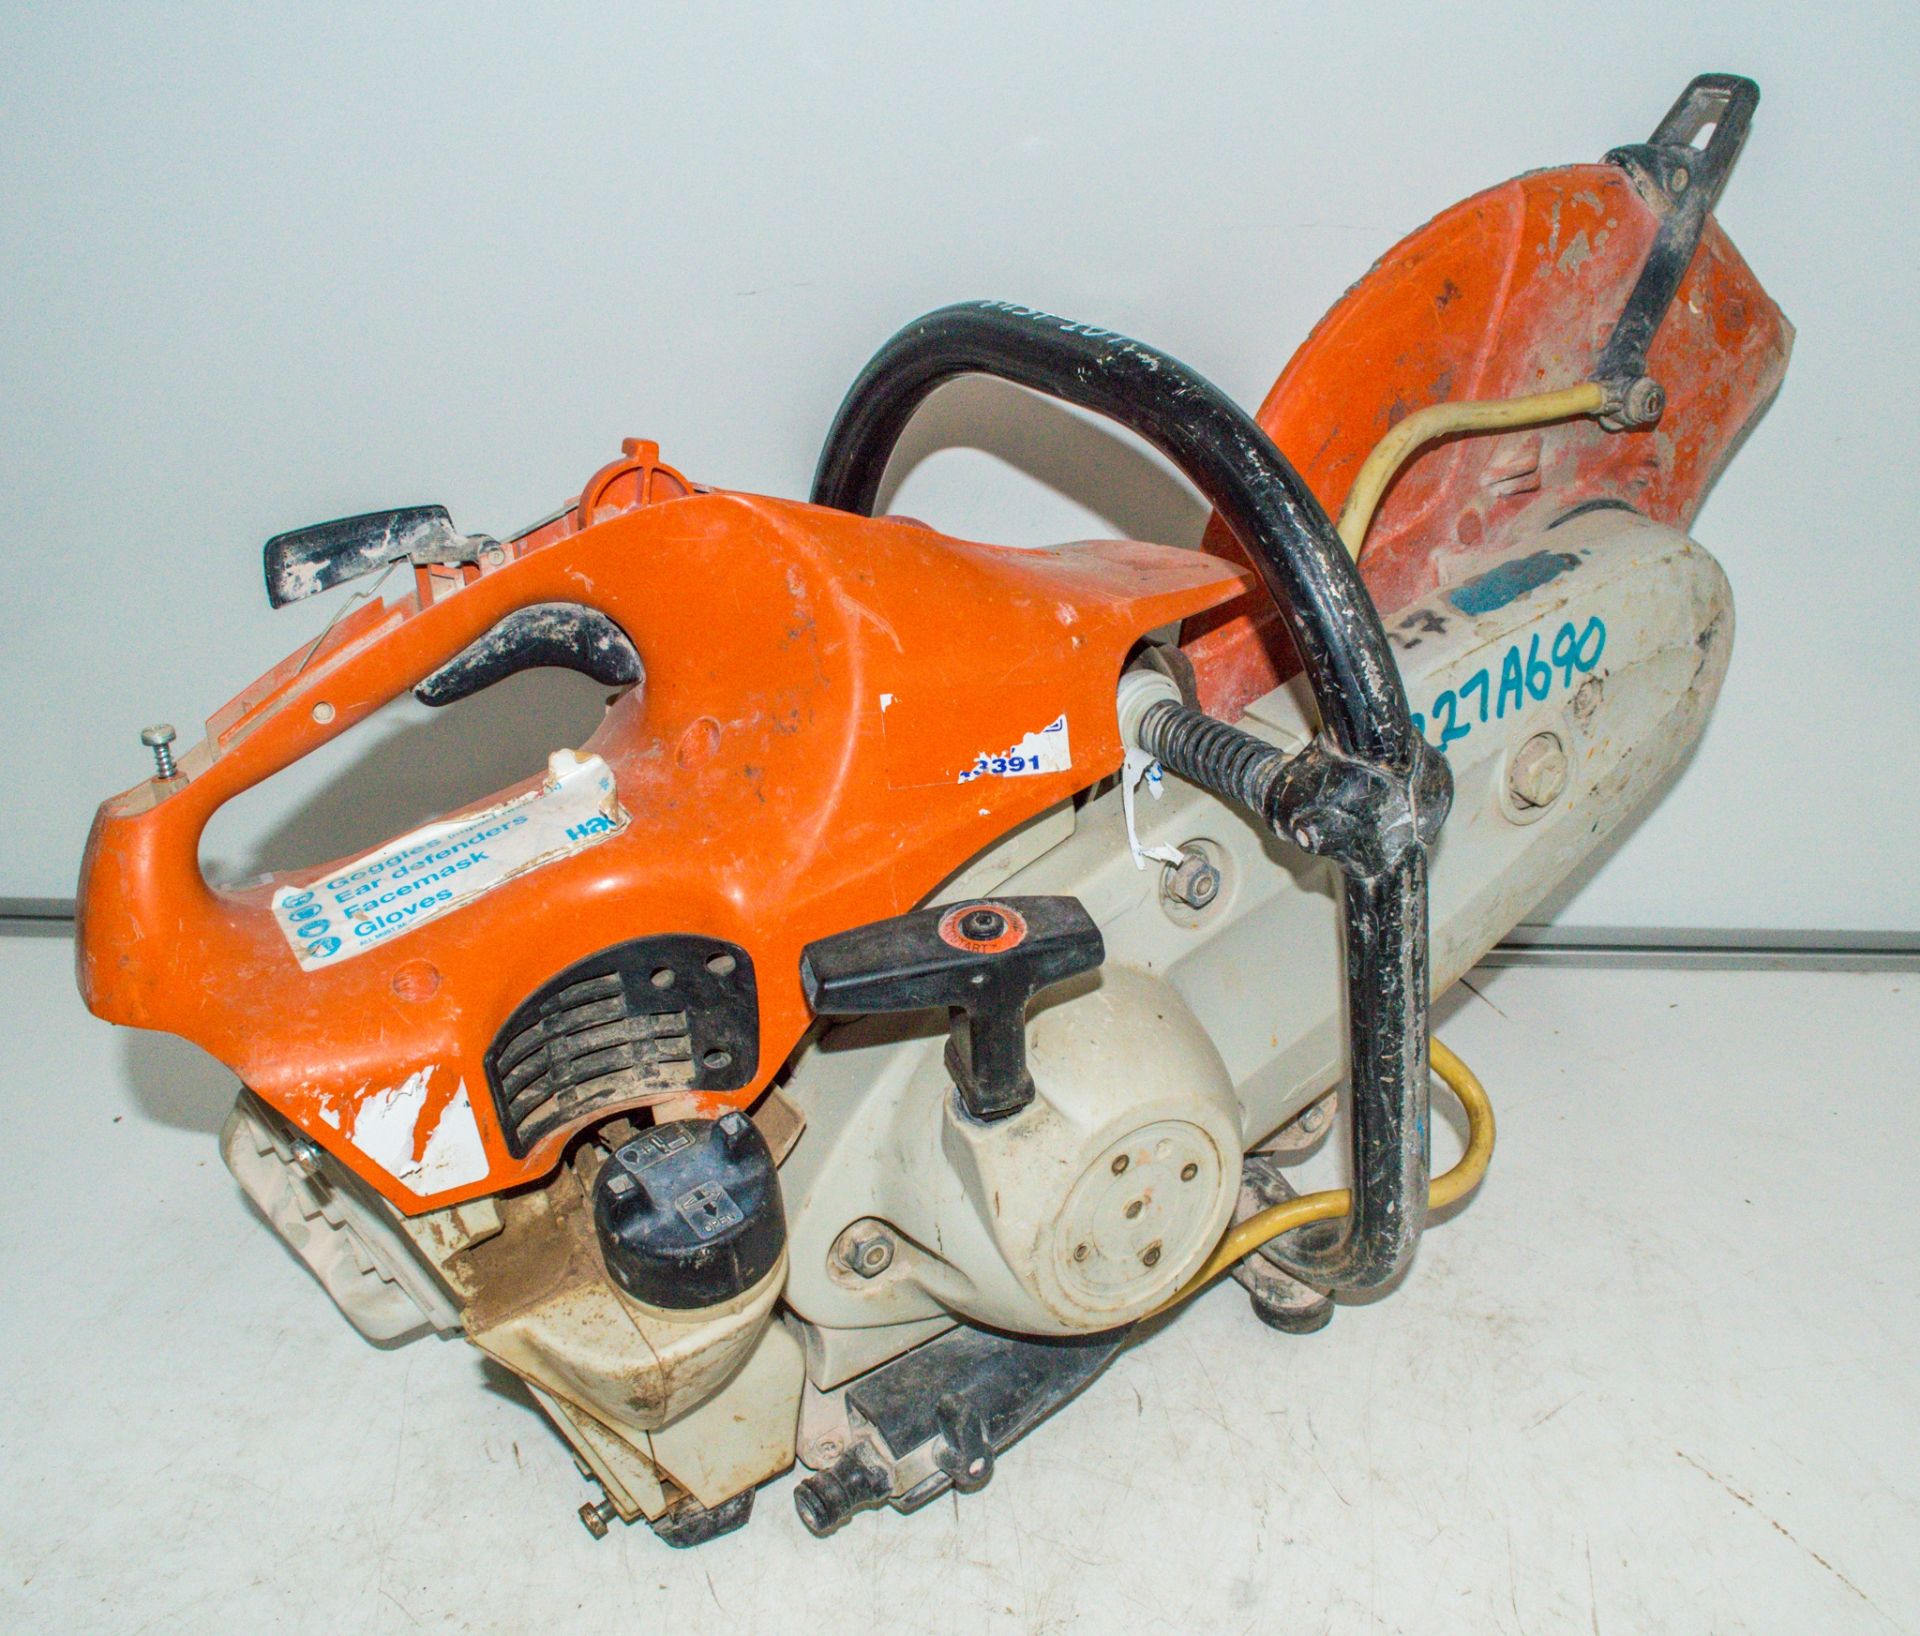 Stihl petrol driven cut off saw 0227A690 ** Handle missing ** - Image 2 of 2